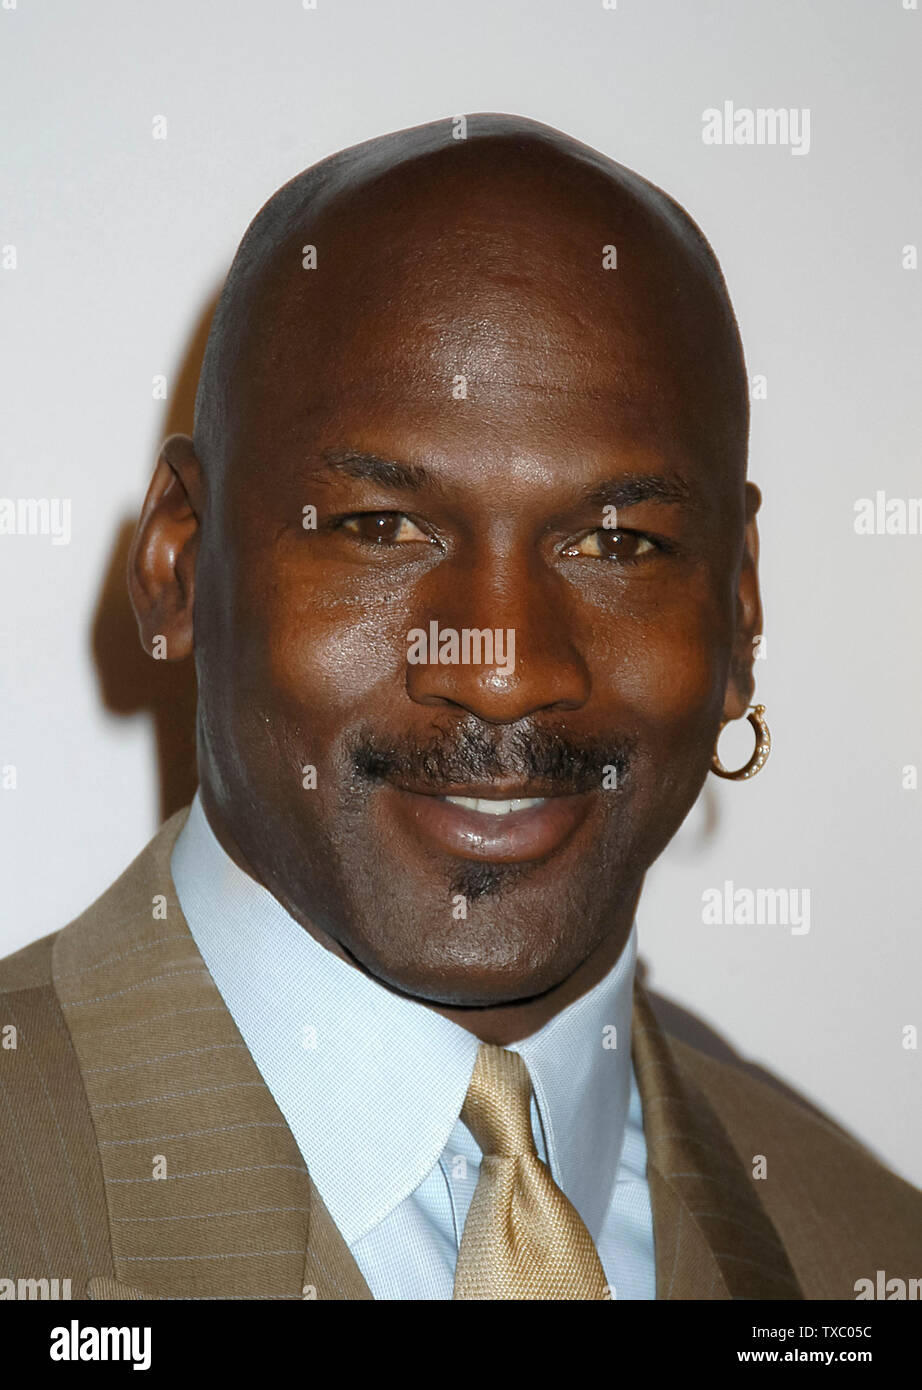 Michael Jordan at Jordan's NBA All Star Comedy Court and Celebrity After Party at the Wadsworth Theatre in Los Angeles, CA. The event took place on Friday, February 13, 2004. Photo by: SBM / PictureLux  -  File Reference # 33790-4273SMBPLX Stock Photo